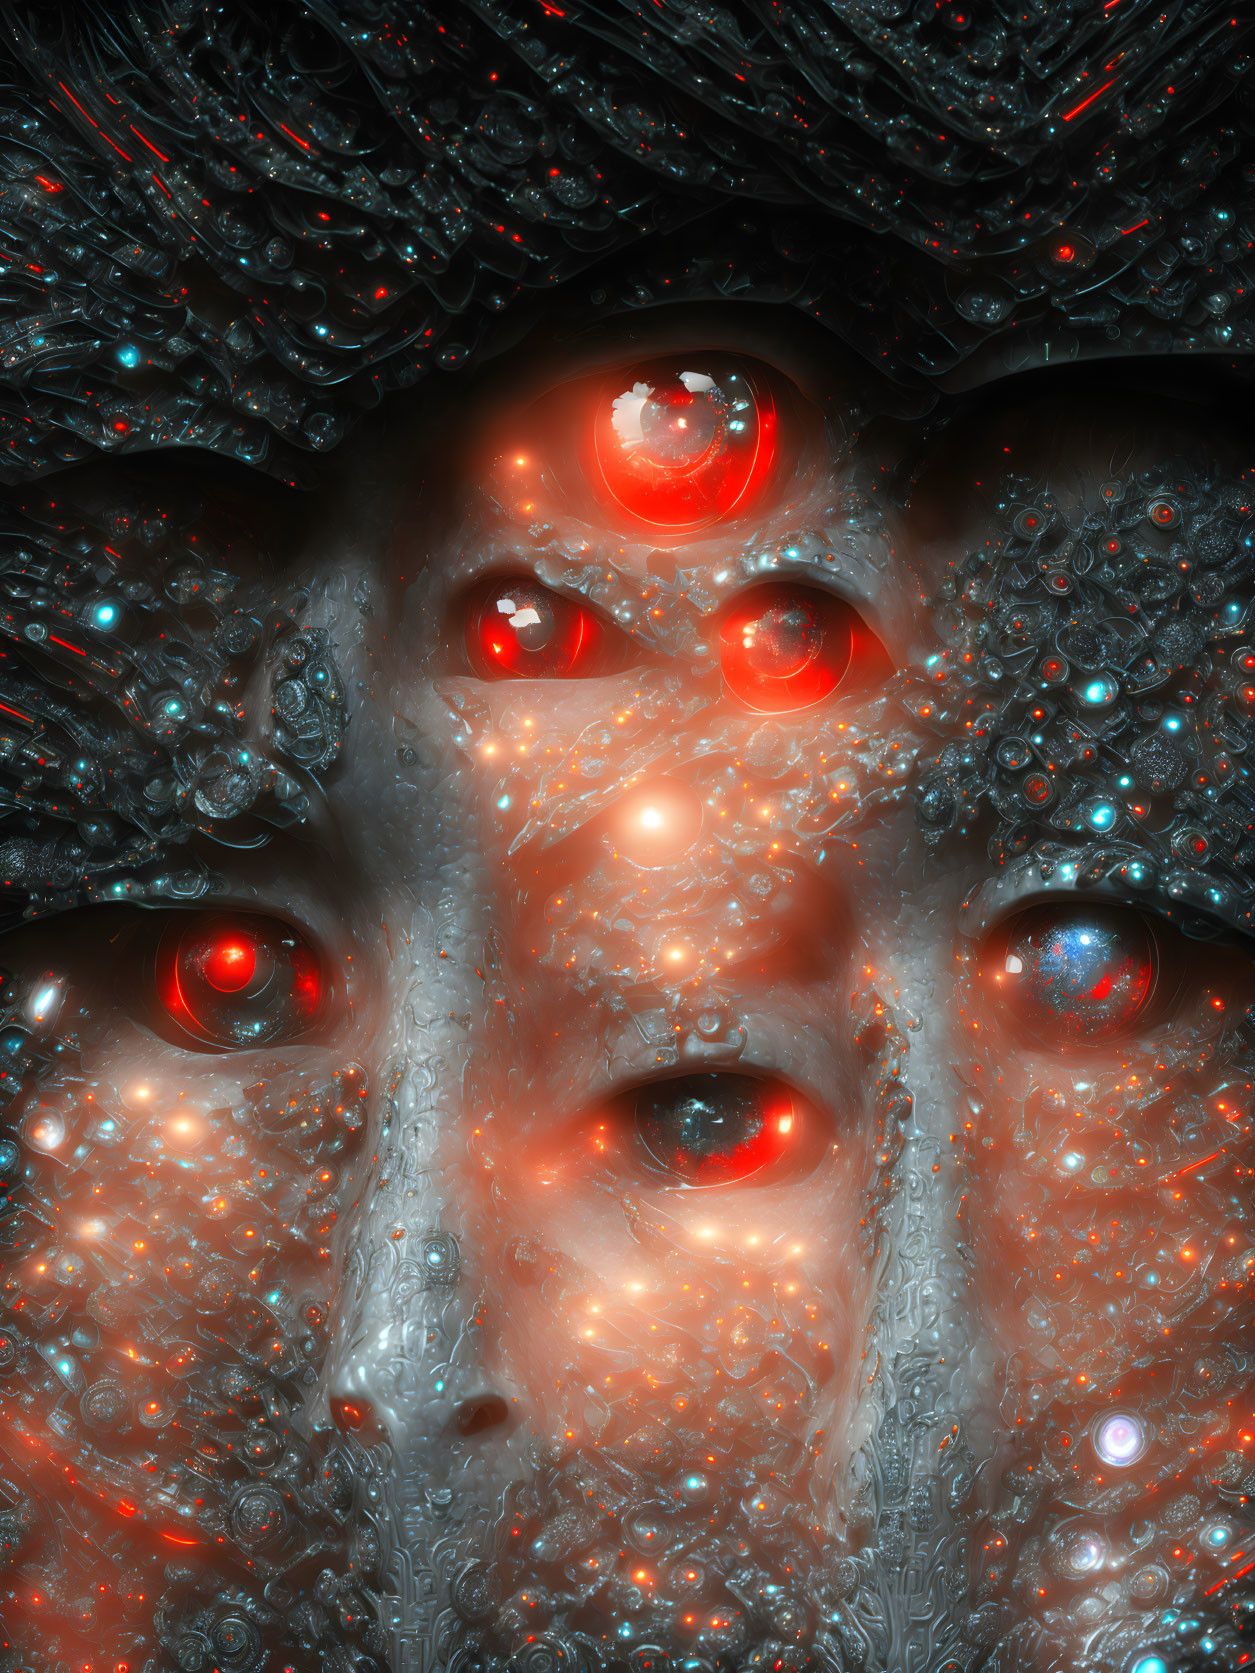 Surreal digital artwork: face with red glowing eyes and planet-like object